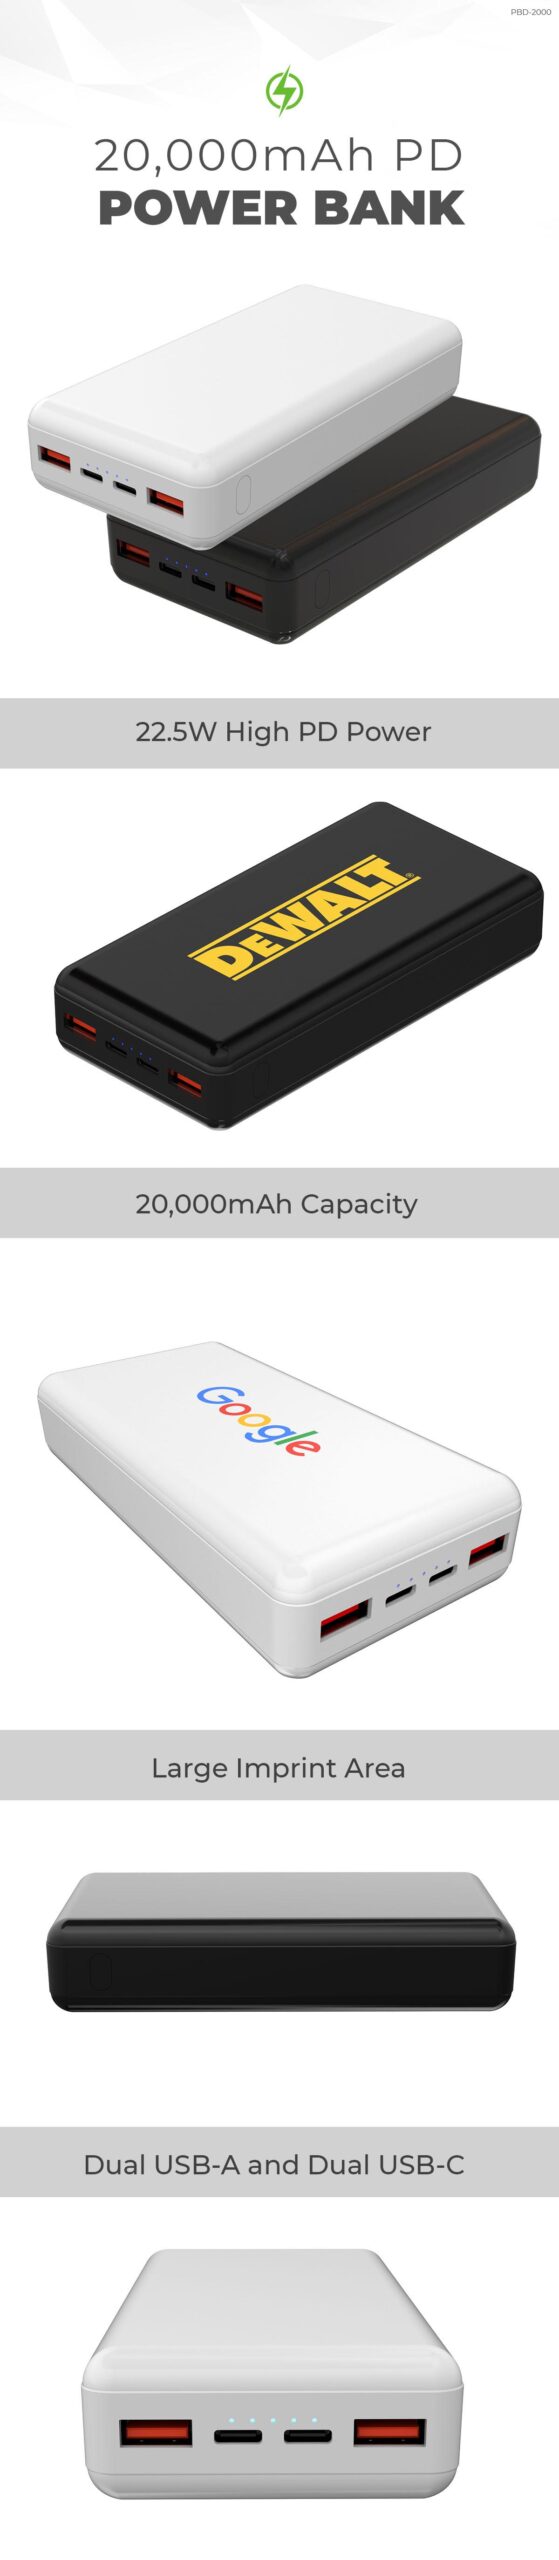 PBD-2000 20,000mAh Power Bank PD Power Delivery Laptop High Capacity Charger